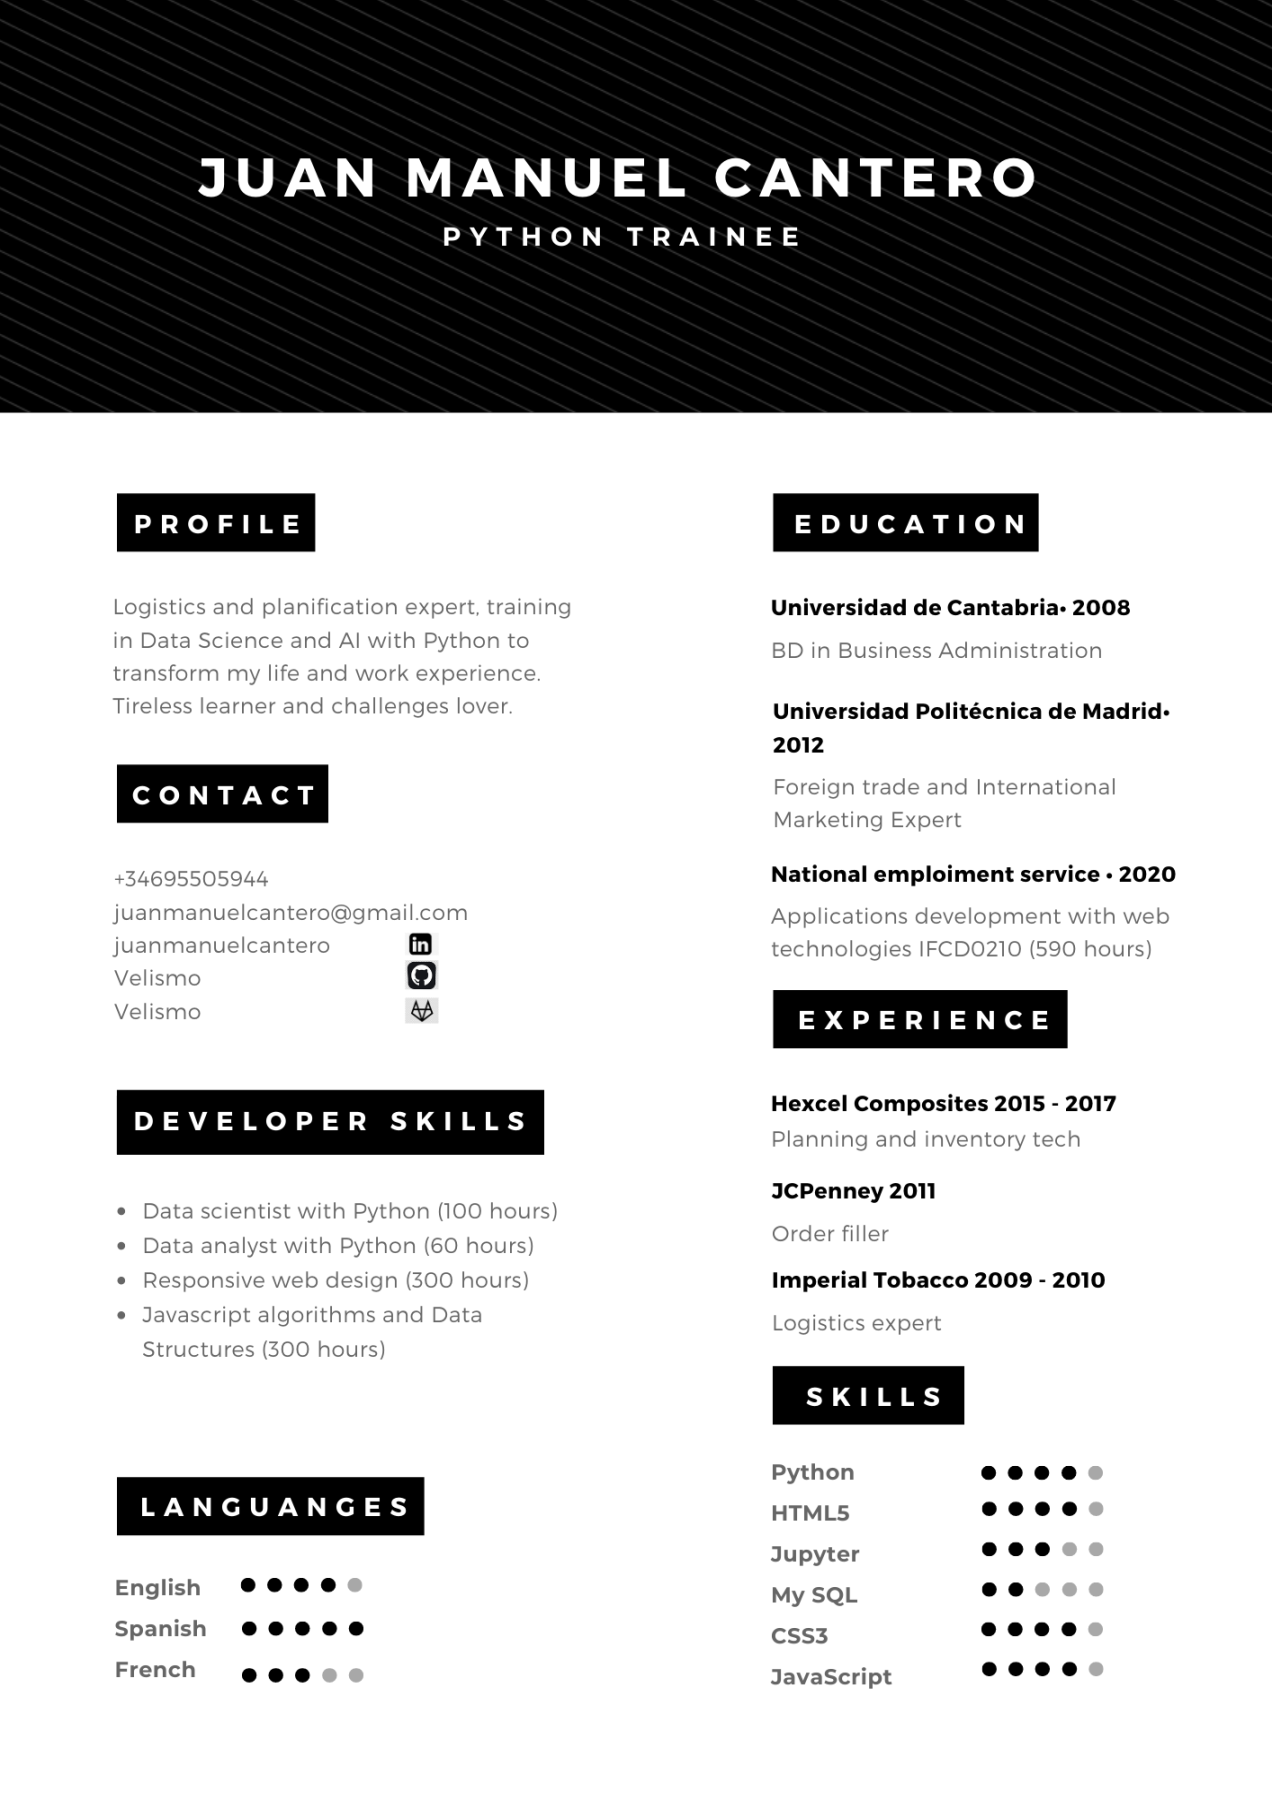 Anyone can help me with my CV - Career Advice - The freeCodeCamp Forum